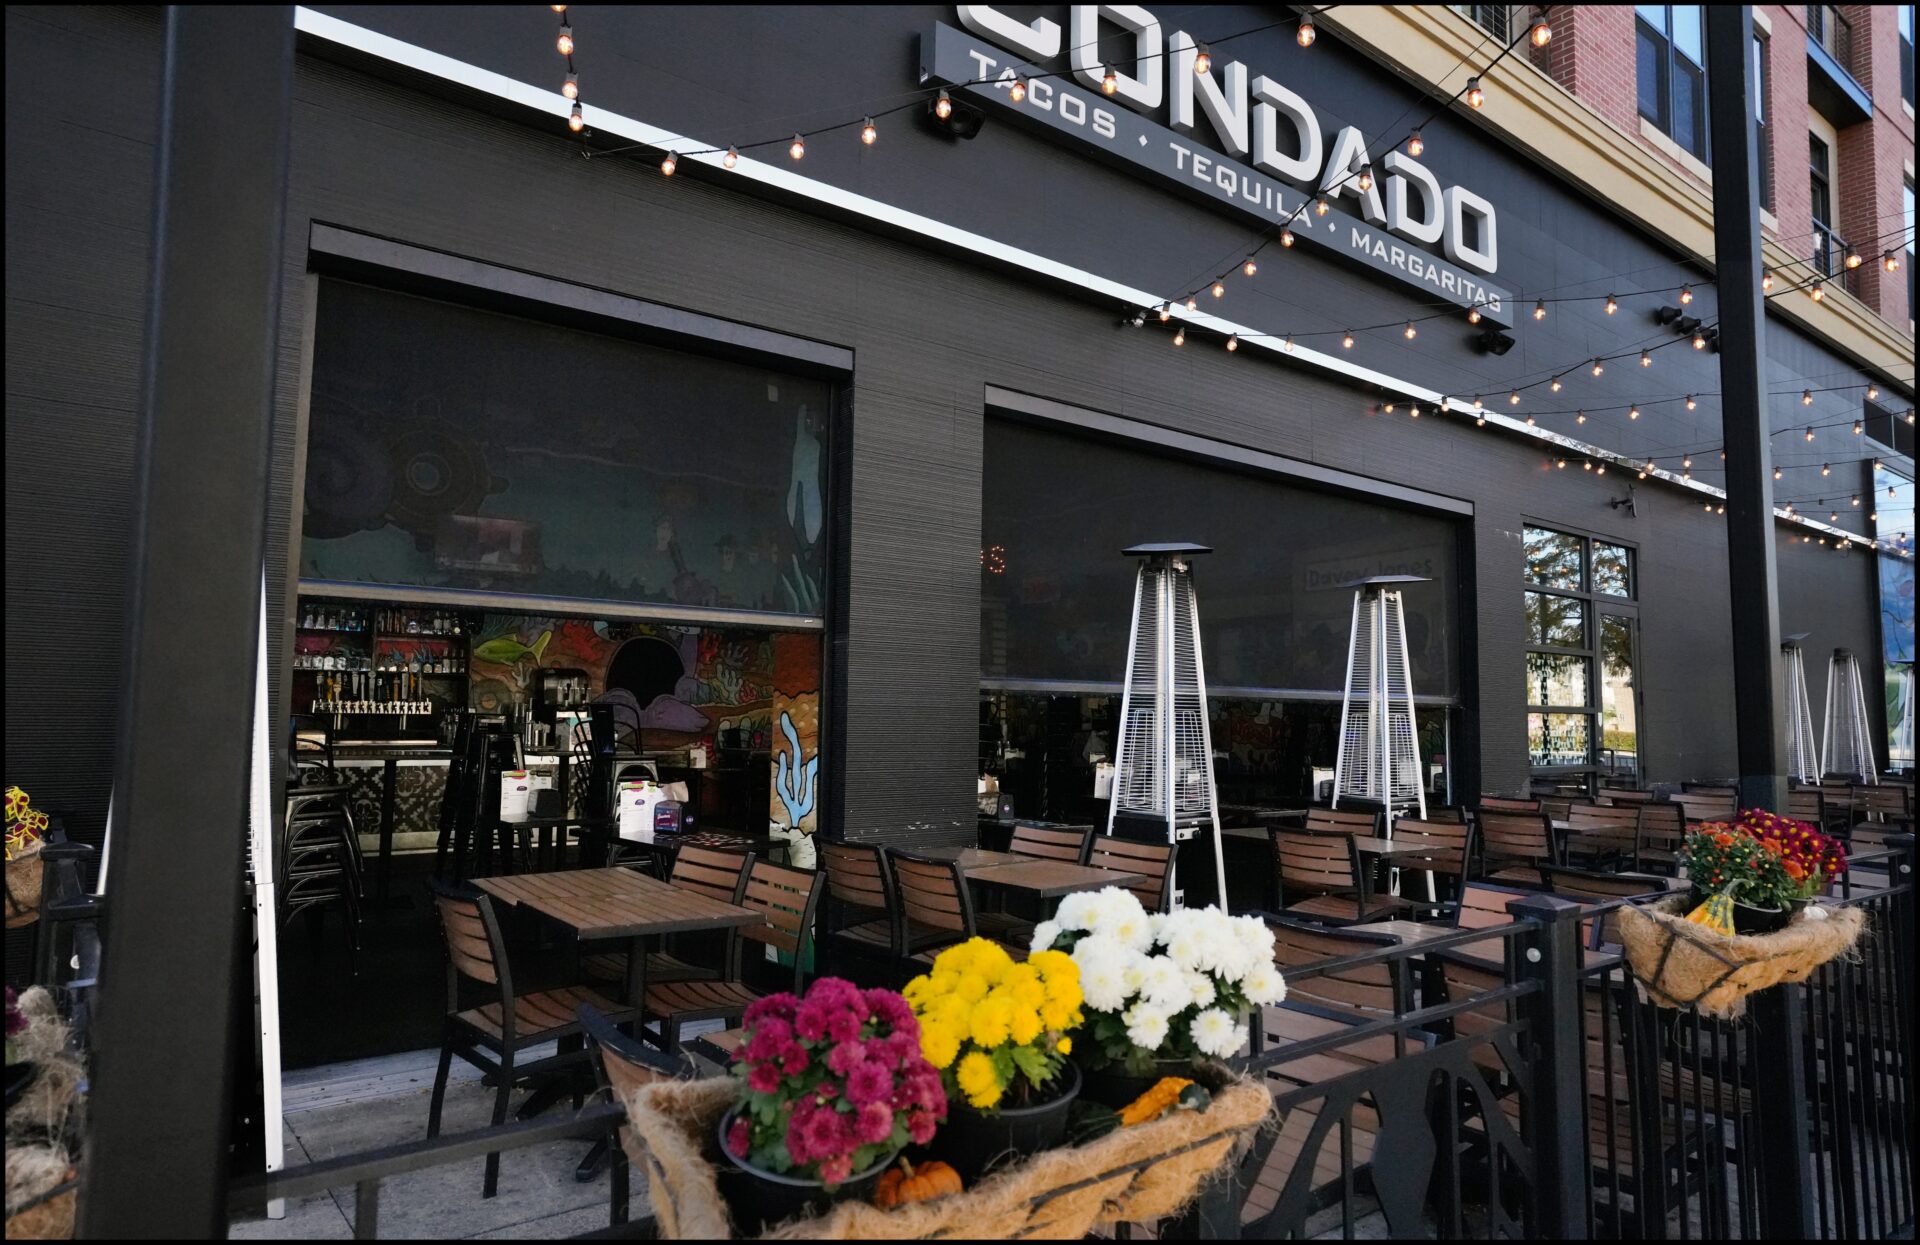 Condado Tacos is a popular local taco joint located right inside of Crocker Park. Screening Solutions Ohio installed Phantom Retractable Power Screens onto the restaurants two large garage openings. The motorized screens provide bug protection in a matter of seconds. With the touch of a button, the screens drop down and seal in the space. Whenever the screens aren’t needed, they roll up and hide away inside their protective housing units blending in with the look of the building.